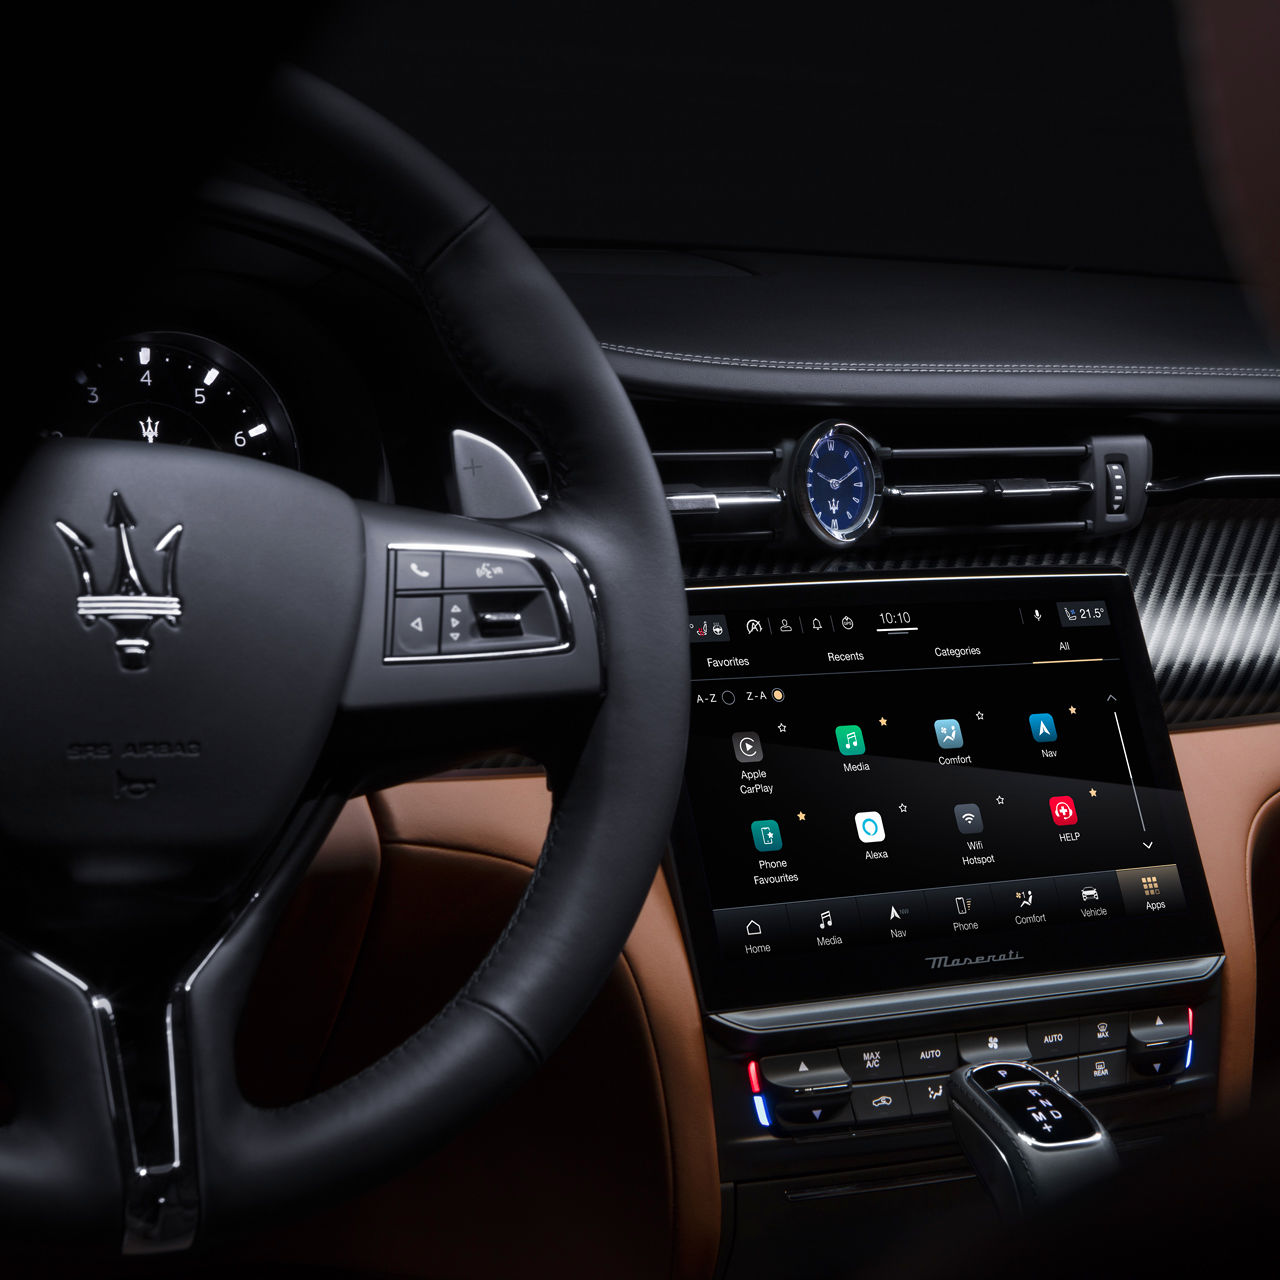 Steering wheel and Dashboard of Quattroporte